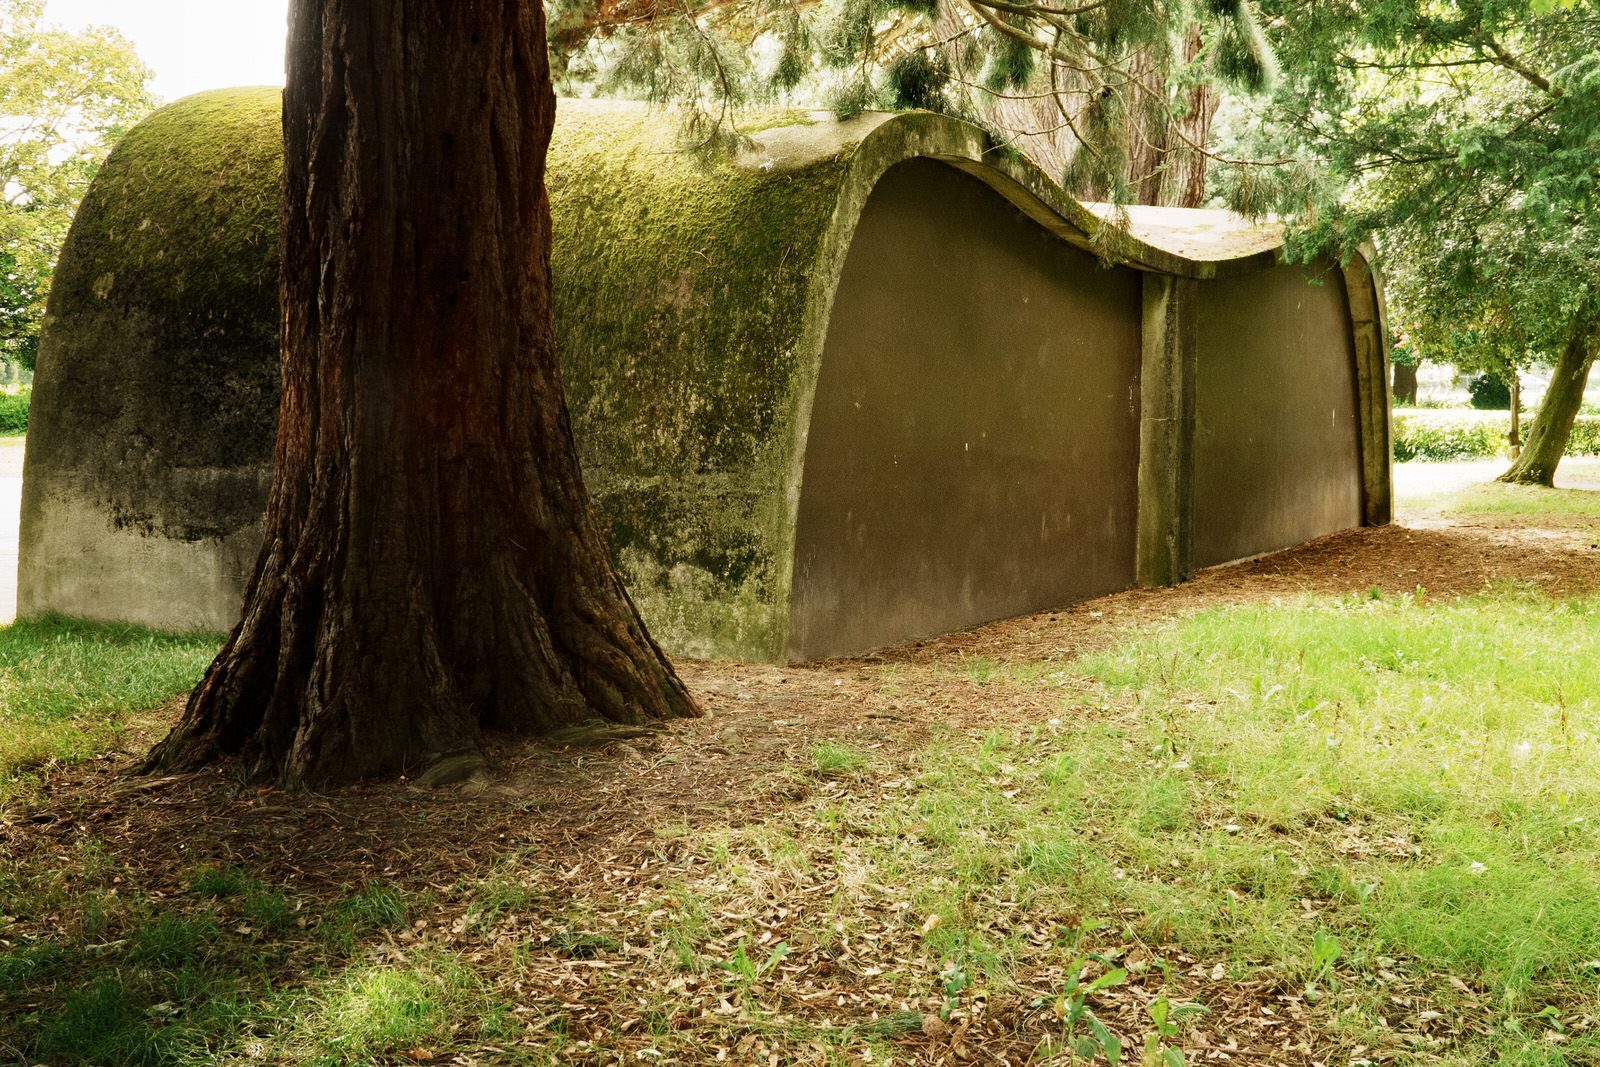 THE CONCRETE SHELTER IN PHOENIX PARK [LOCATED IN THE PEOPLE'S FLOWER GARDENS] 006